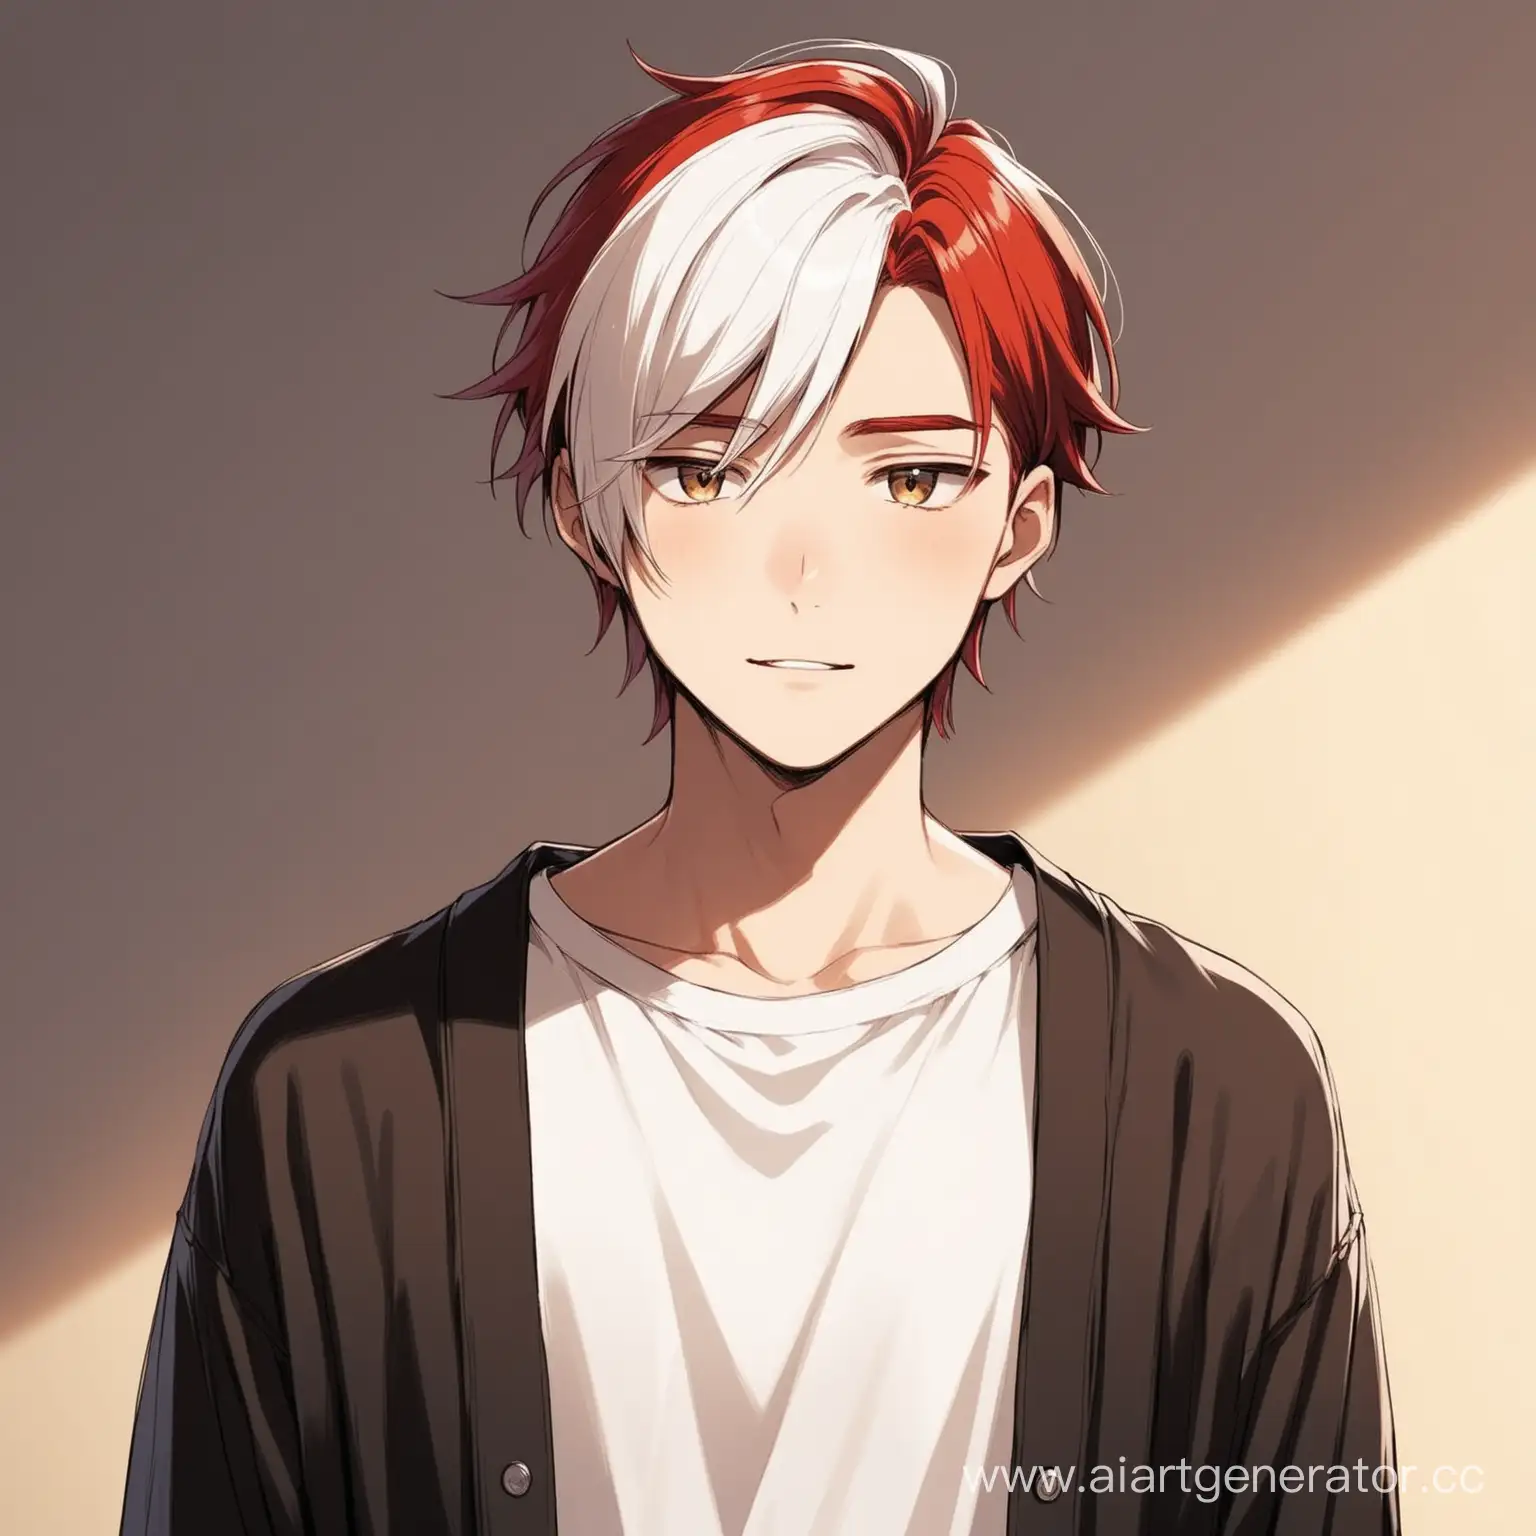 Young-Man-with-Distinctive-Red-and-White-Hair-in-Stylish-Attire